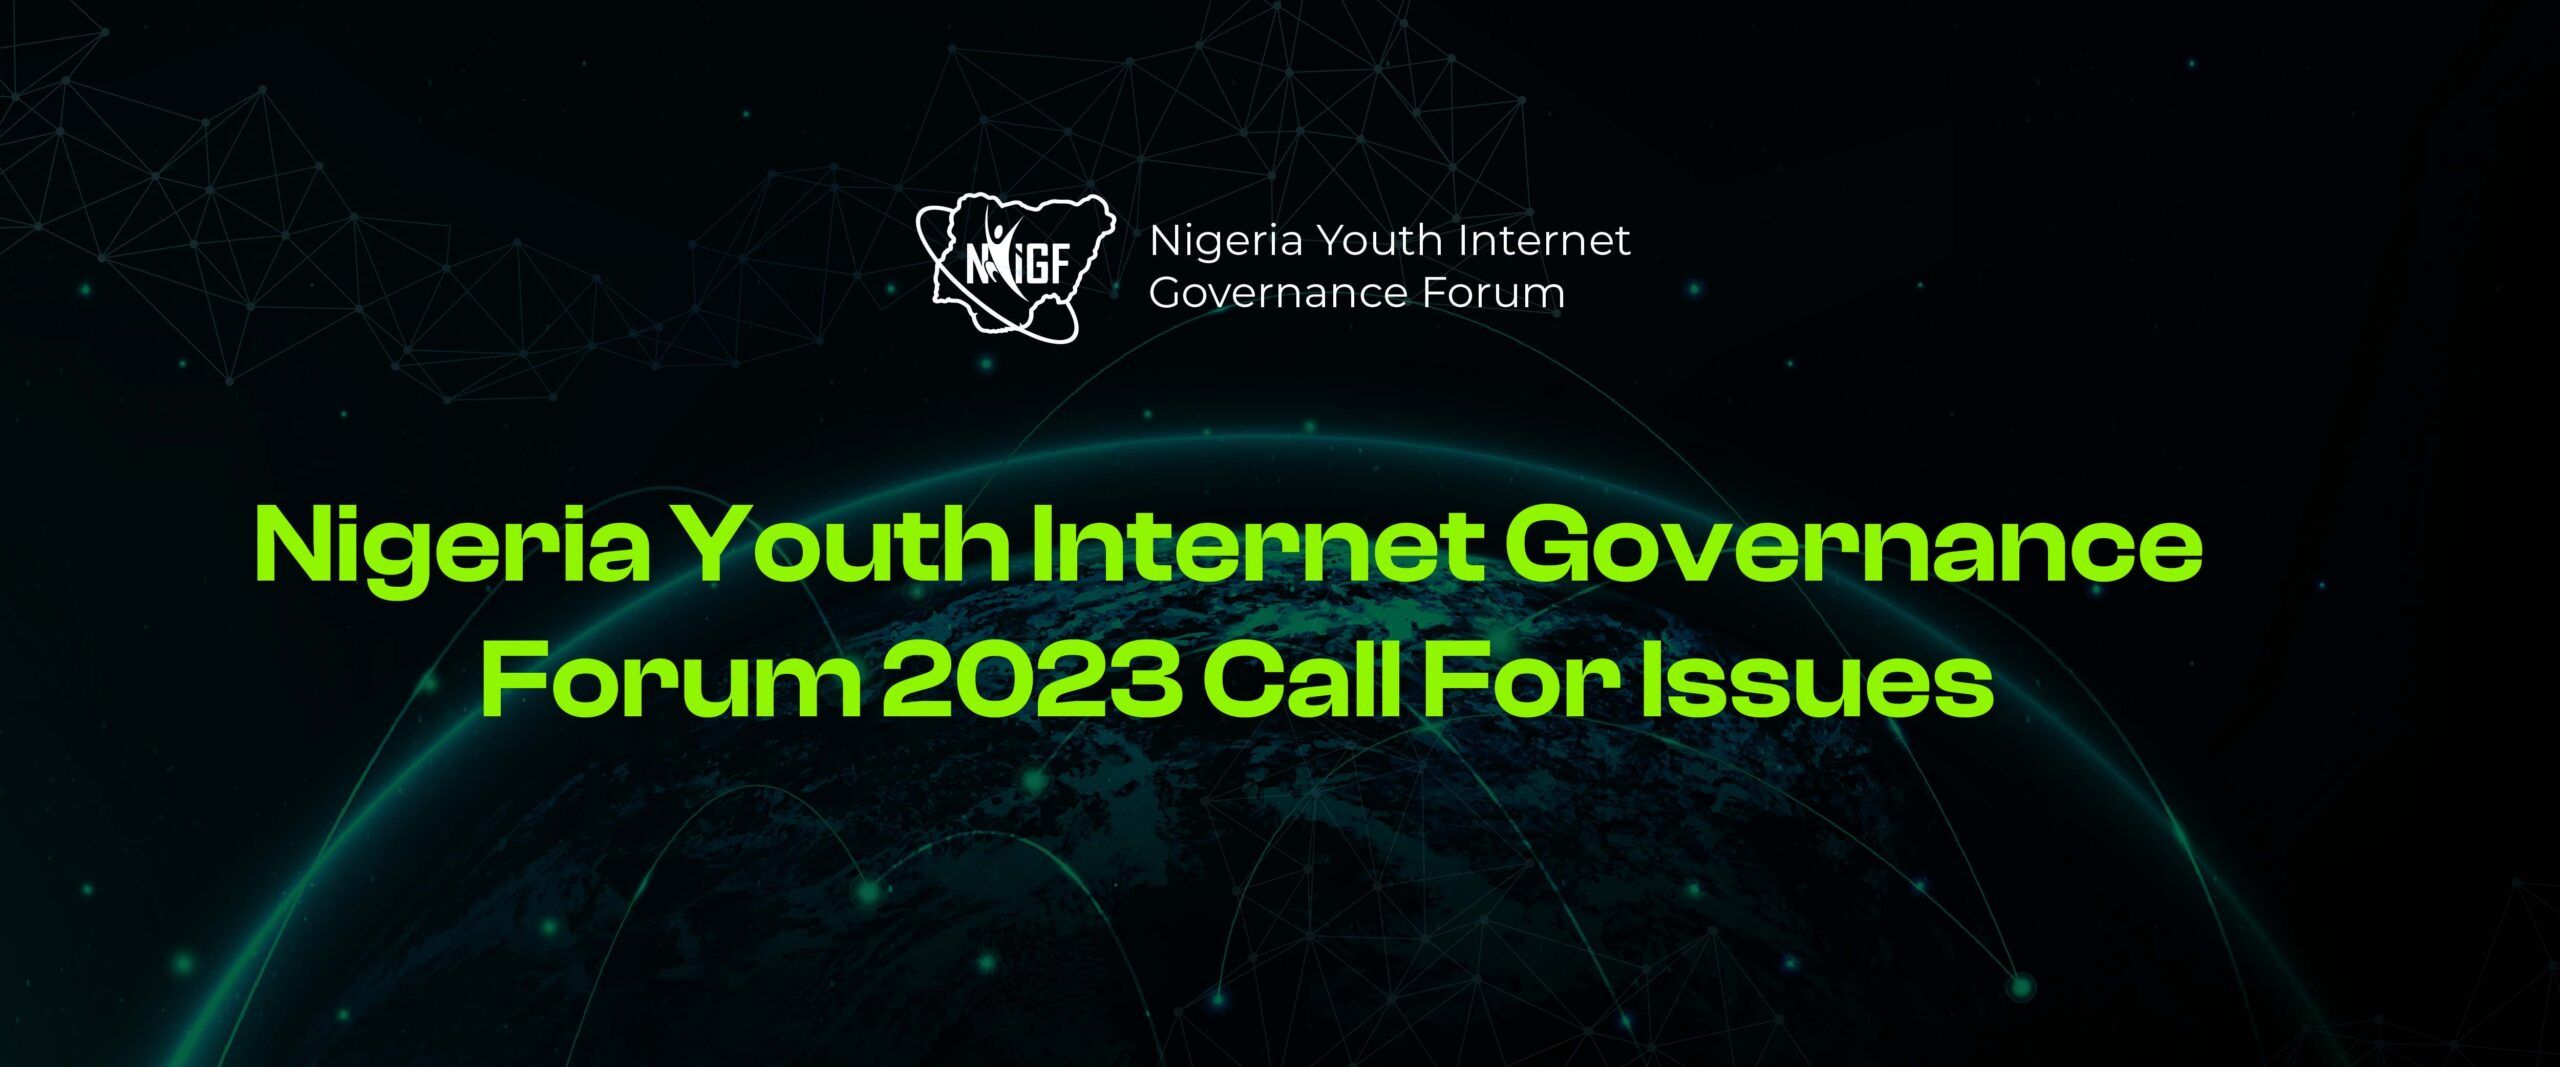 Nigeria Youth Internet Governance Forum 2023 Call For Issues